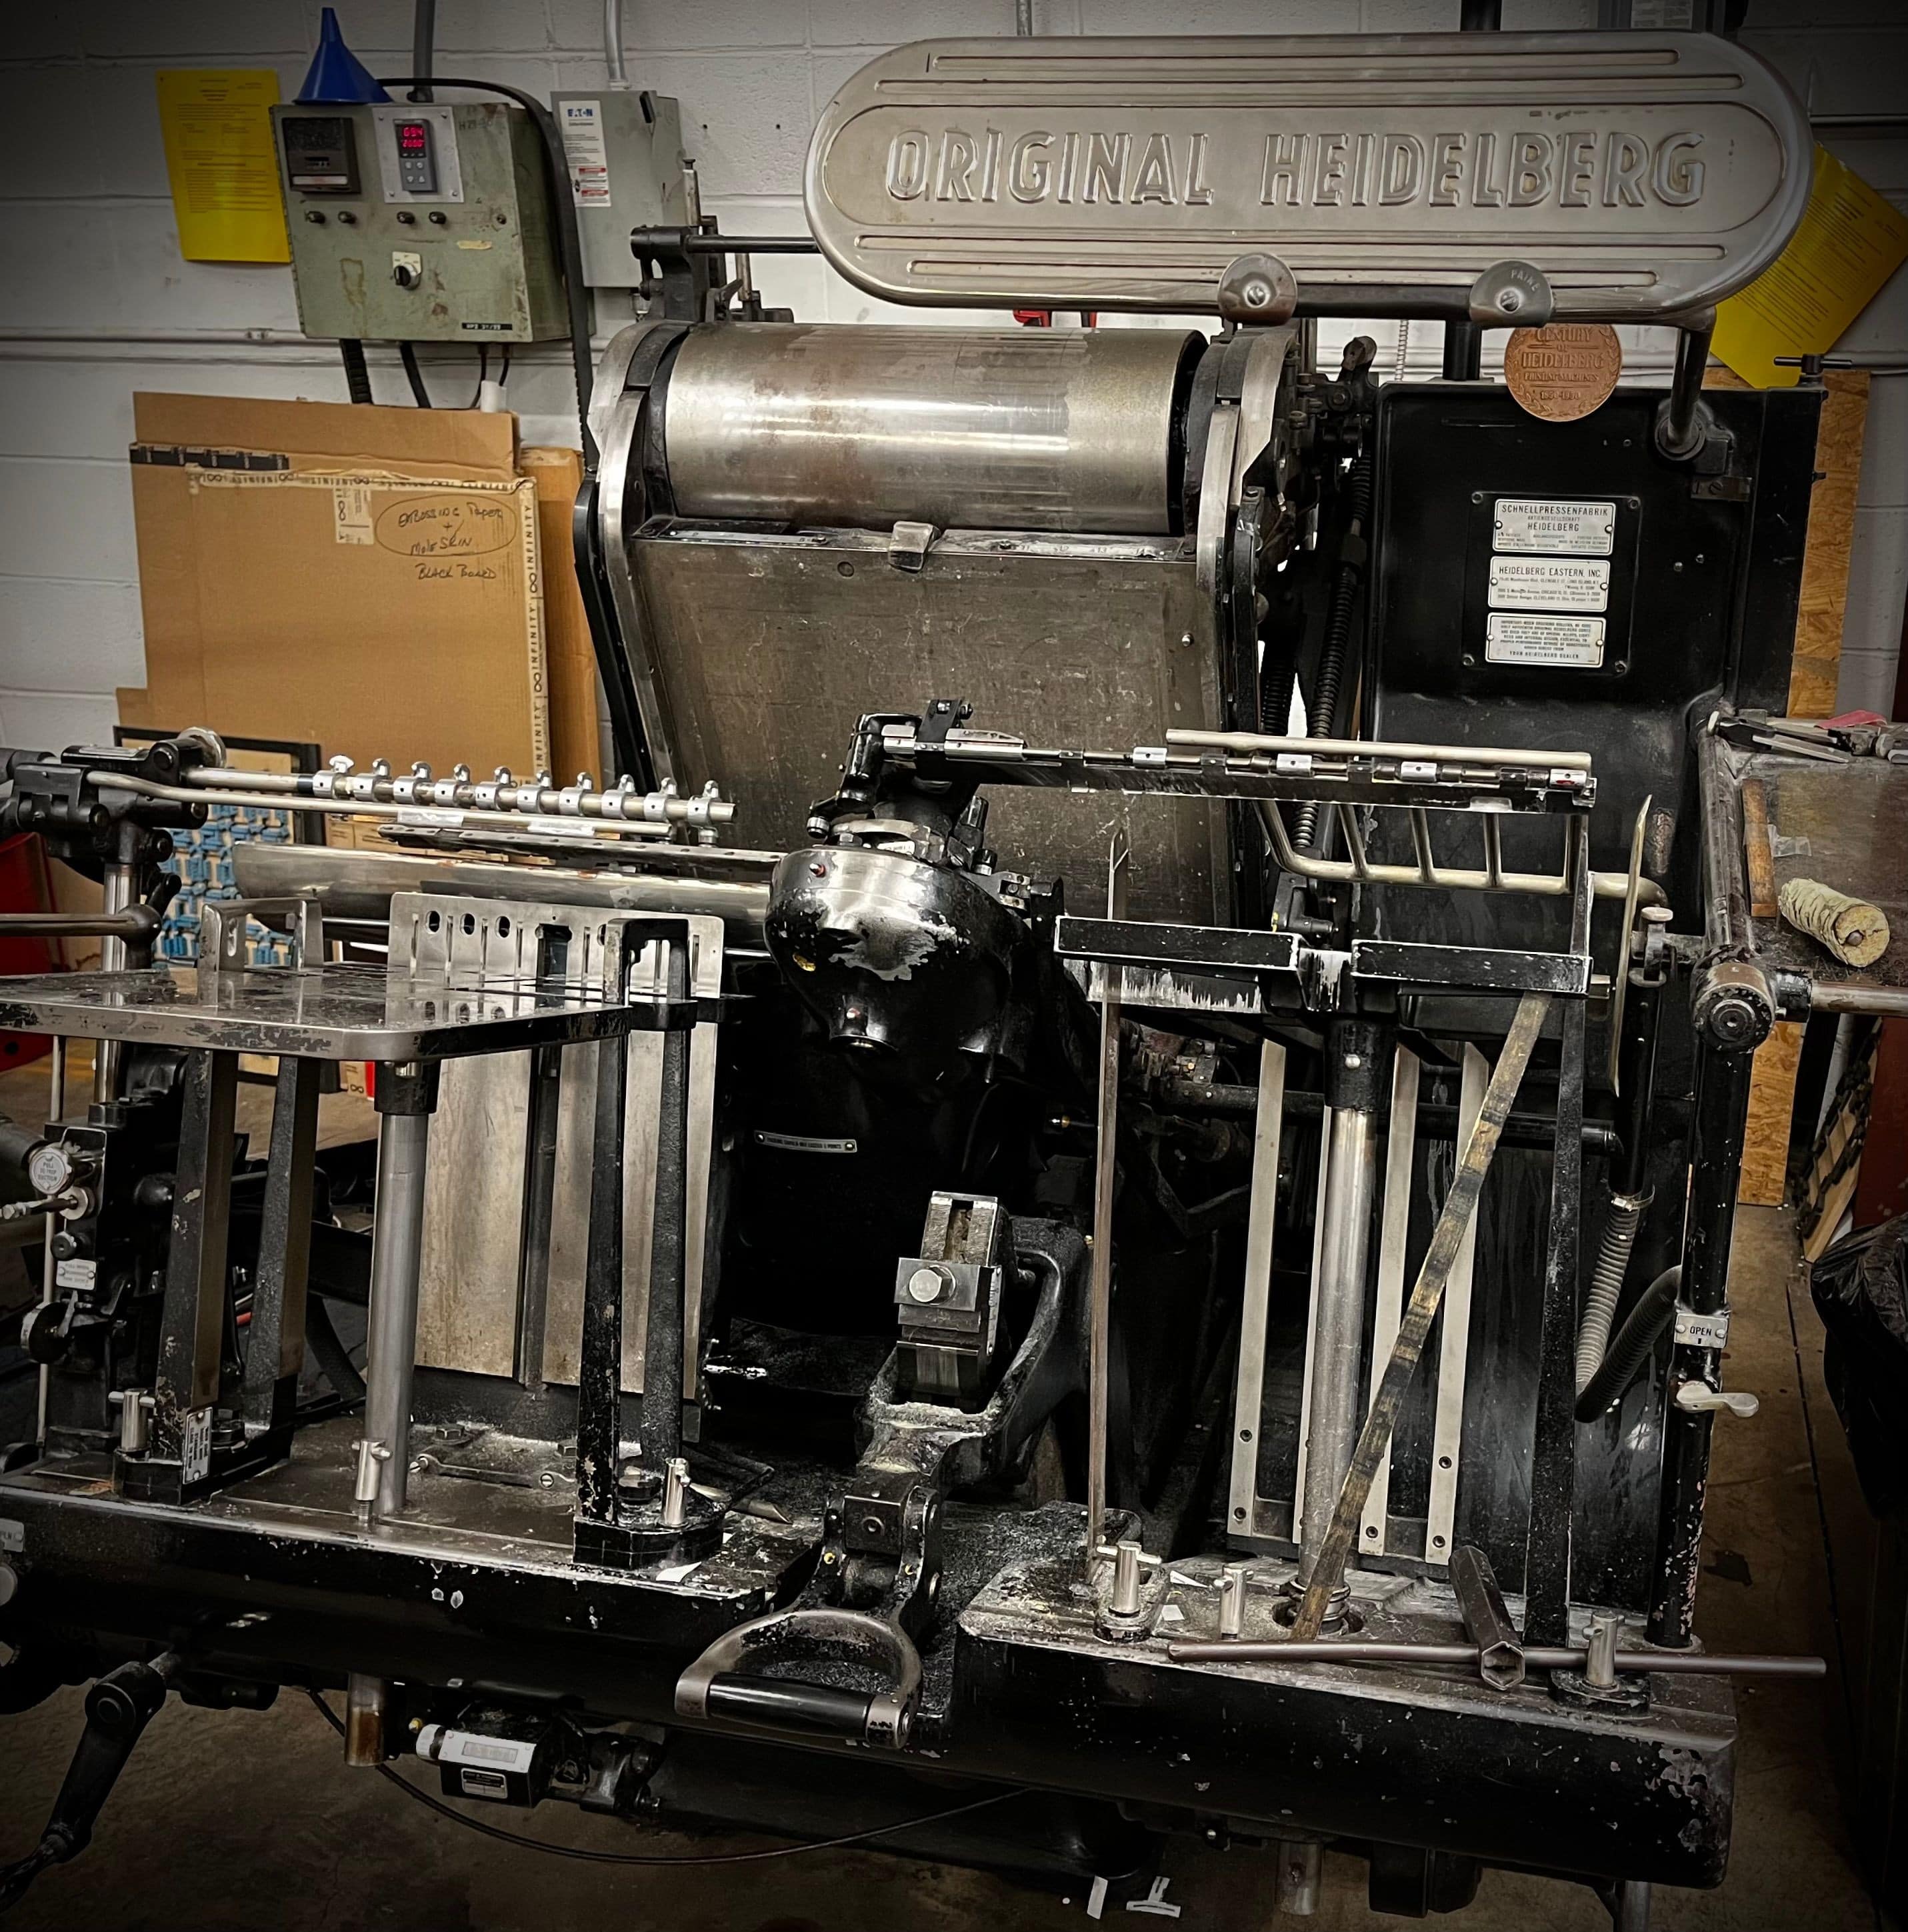 This press can diecut,emboss,foil, stamp and add the extra features to any project.